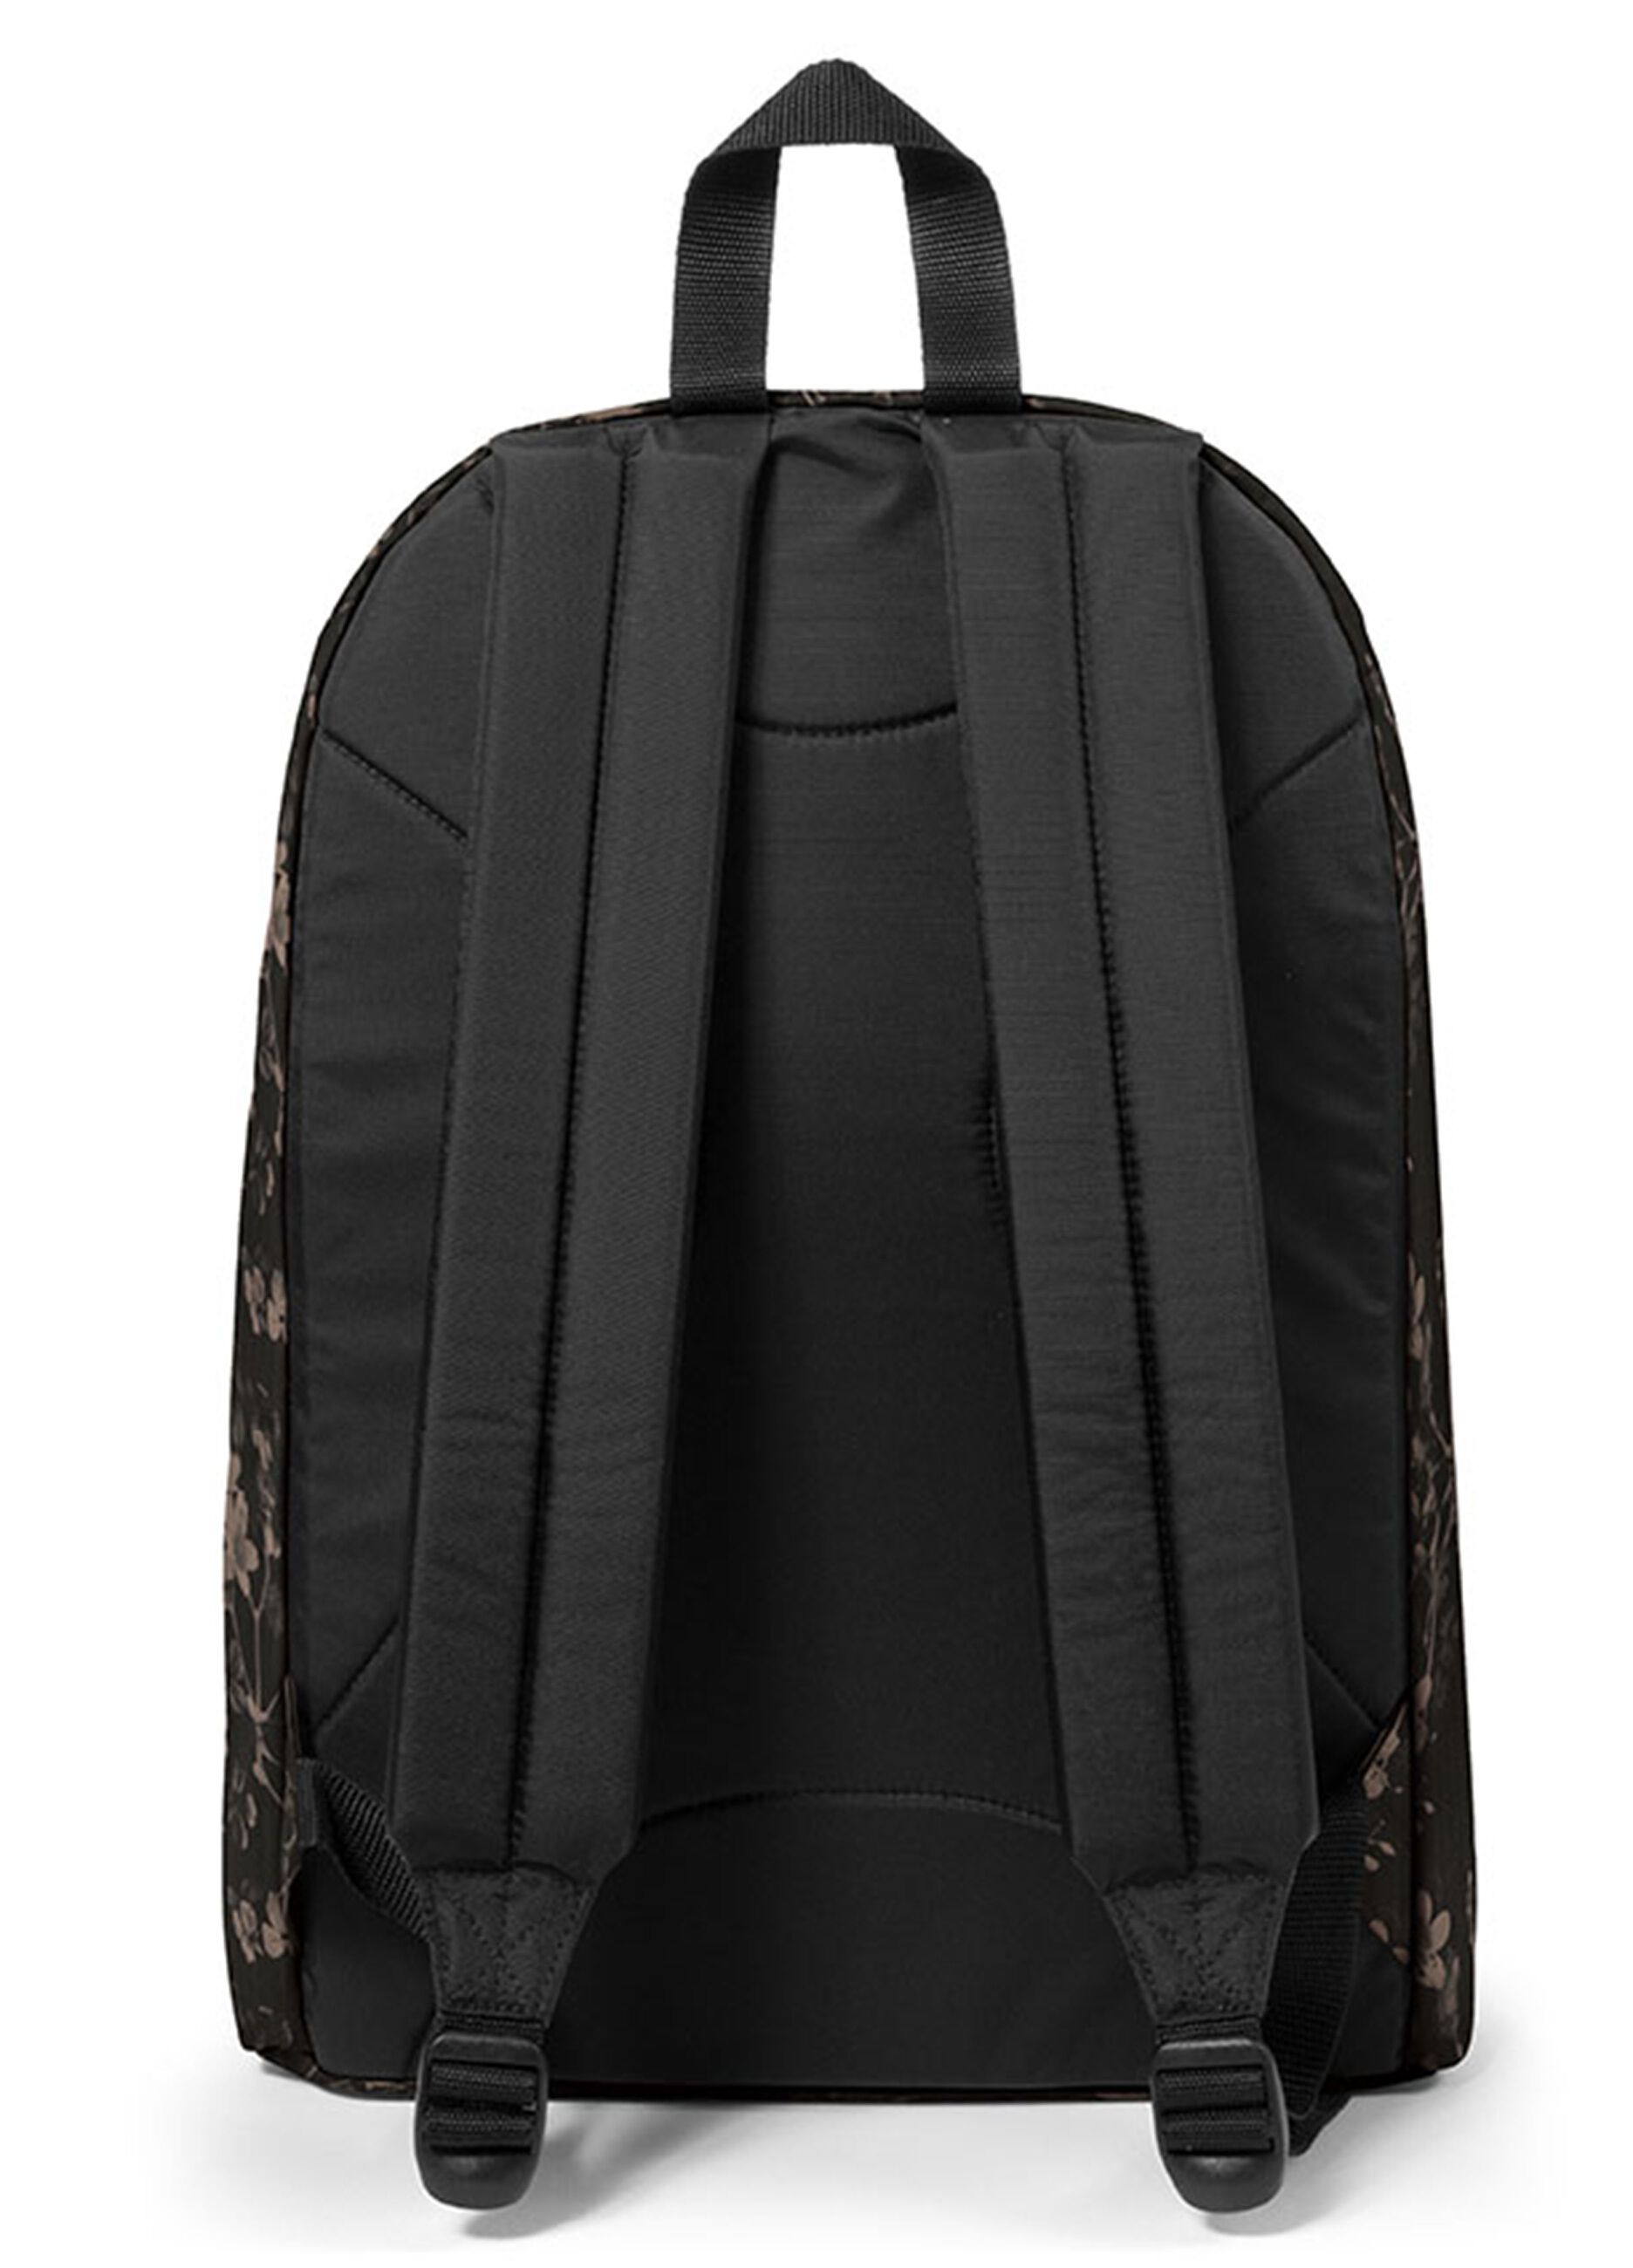 Eastpak Out Of Office backpack